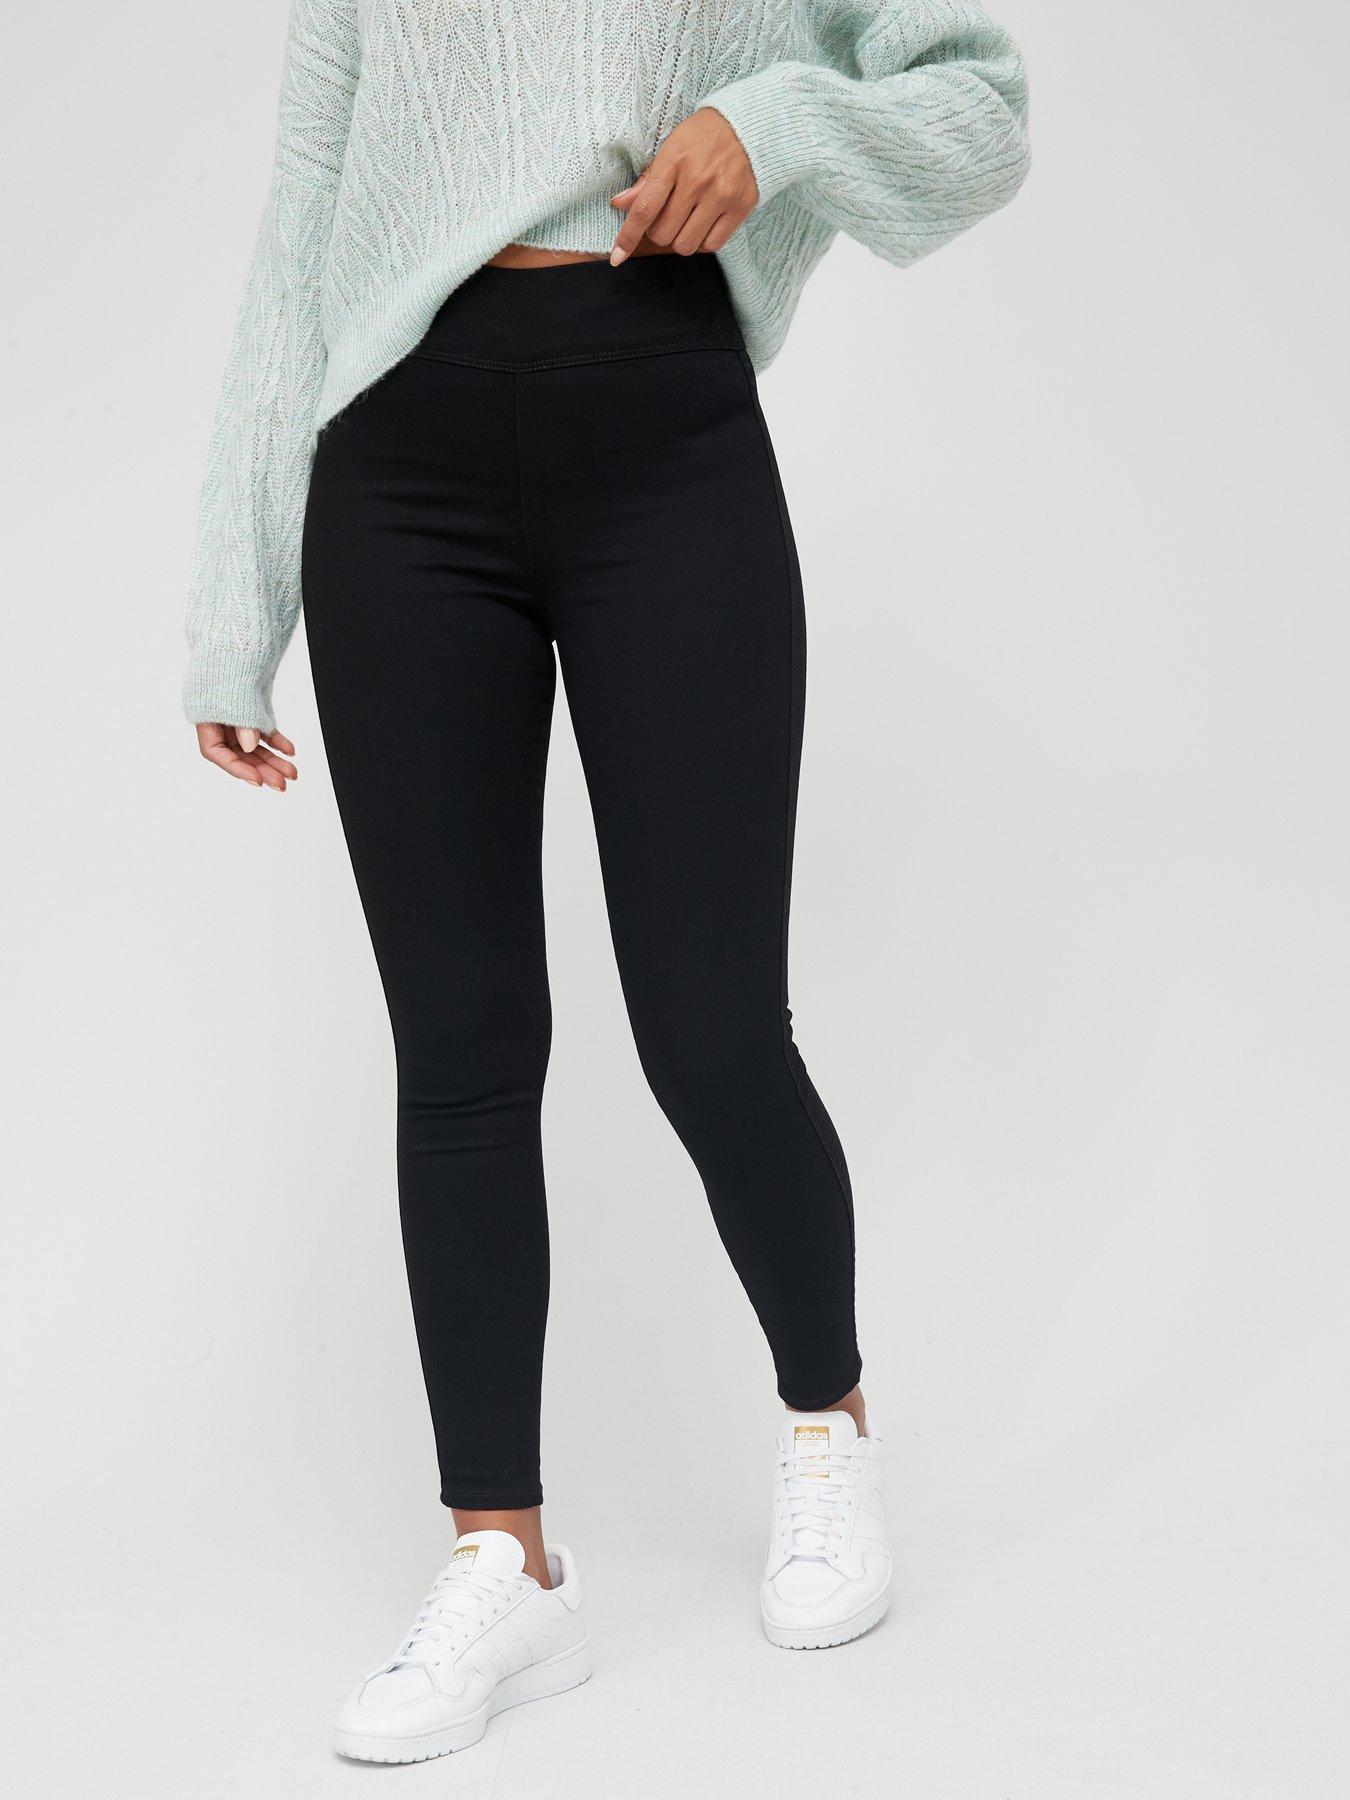 Just Love Denim Jeggings for Women with Pockets Comfortable Stretch Jeans Leggings